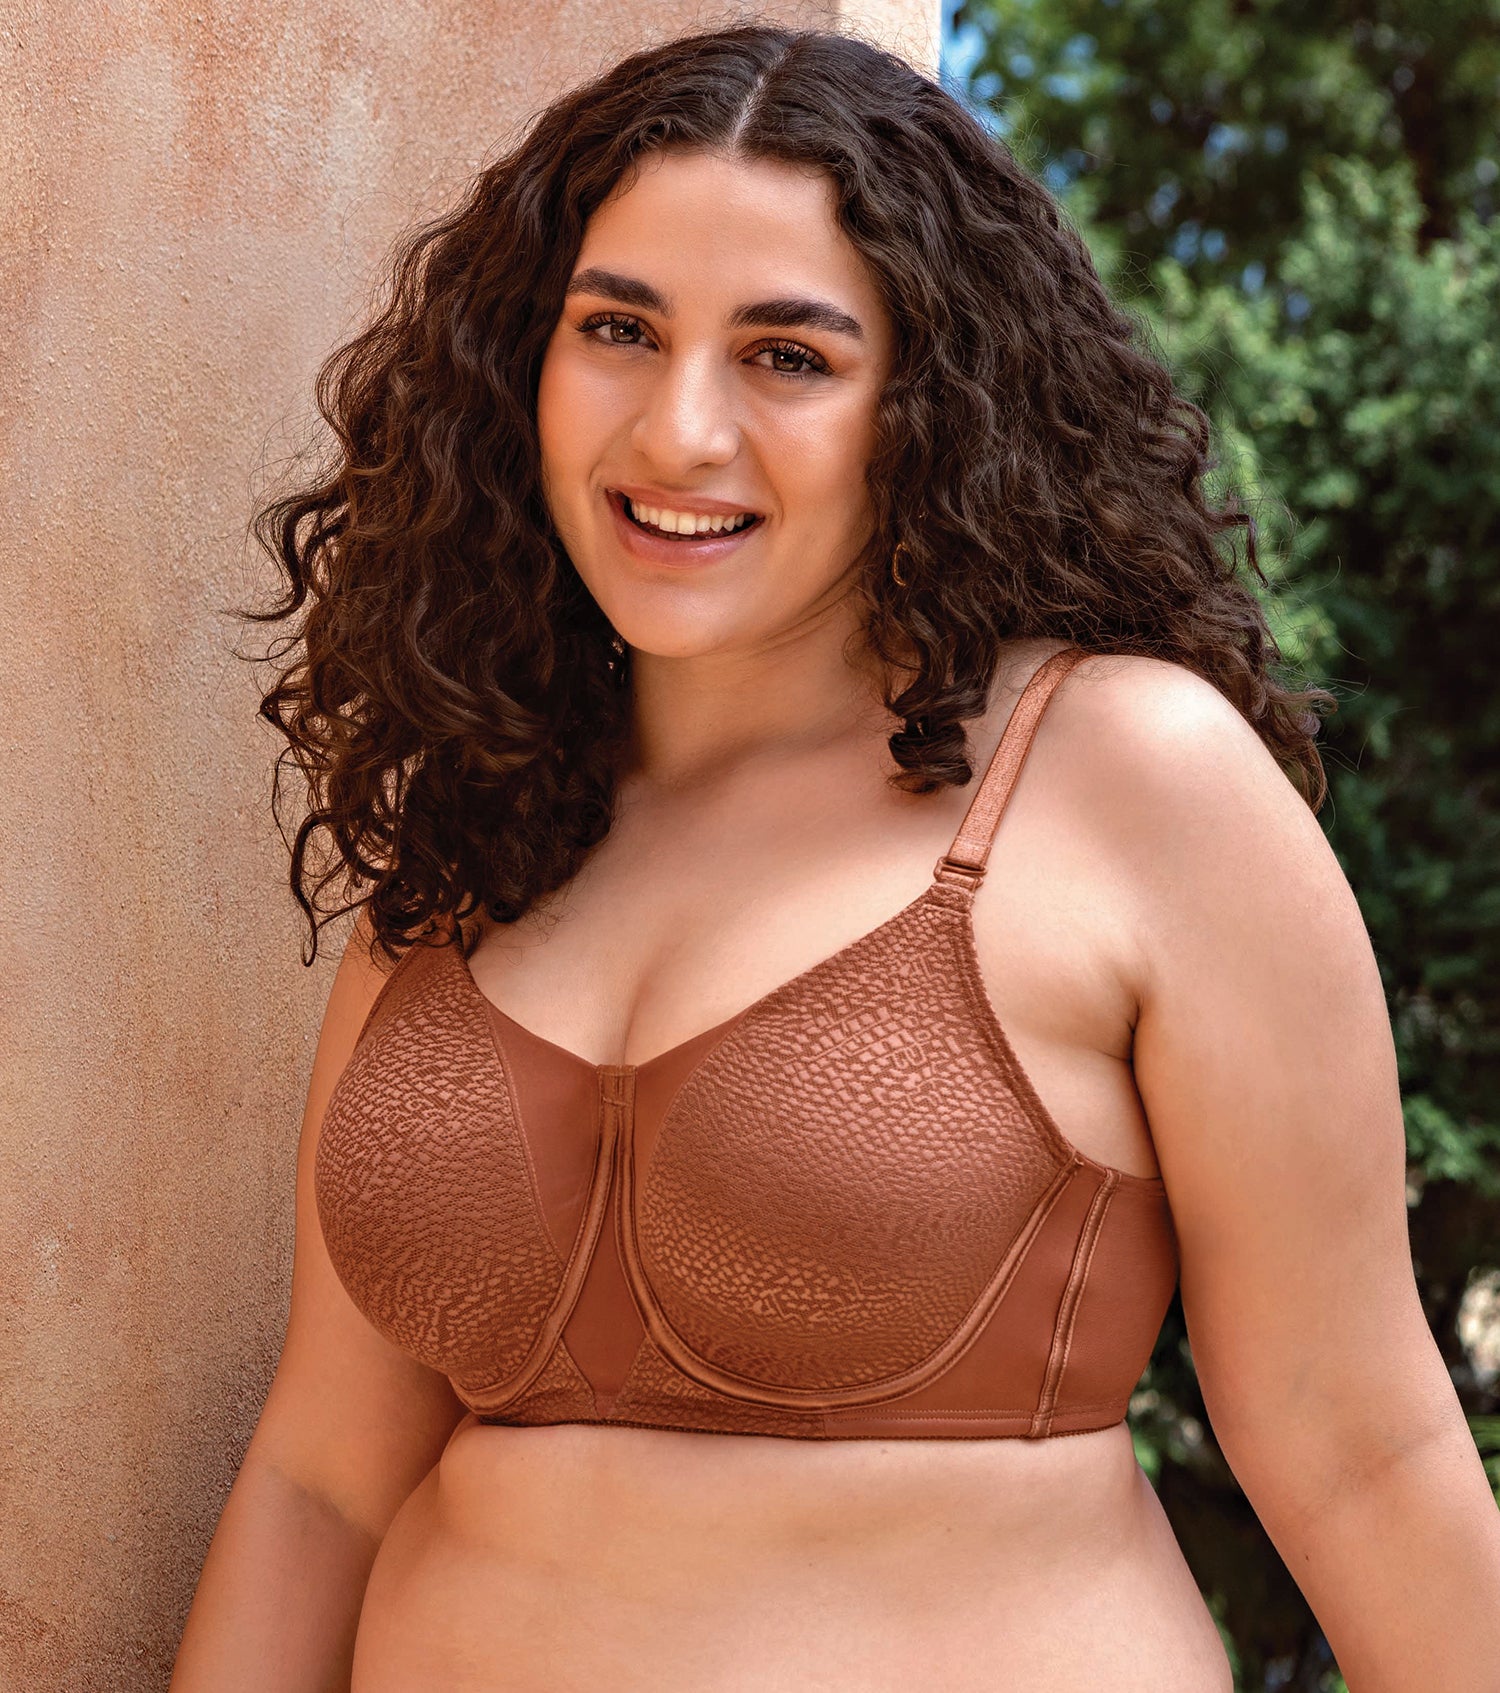 Enamor F124
SMOOTHENING MINIMIZER BRA
NON-PADDED  WIRED FULL COVERAGE